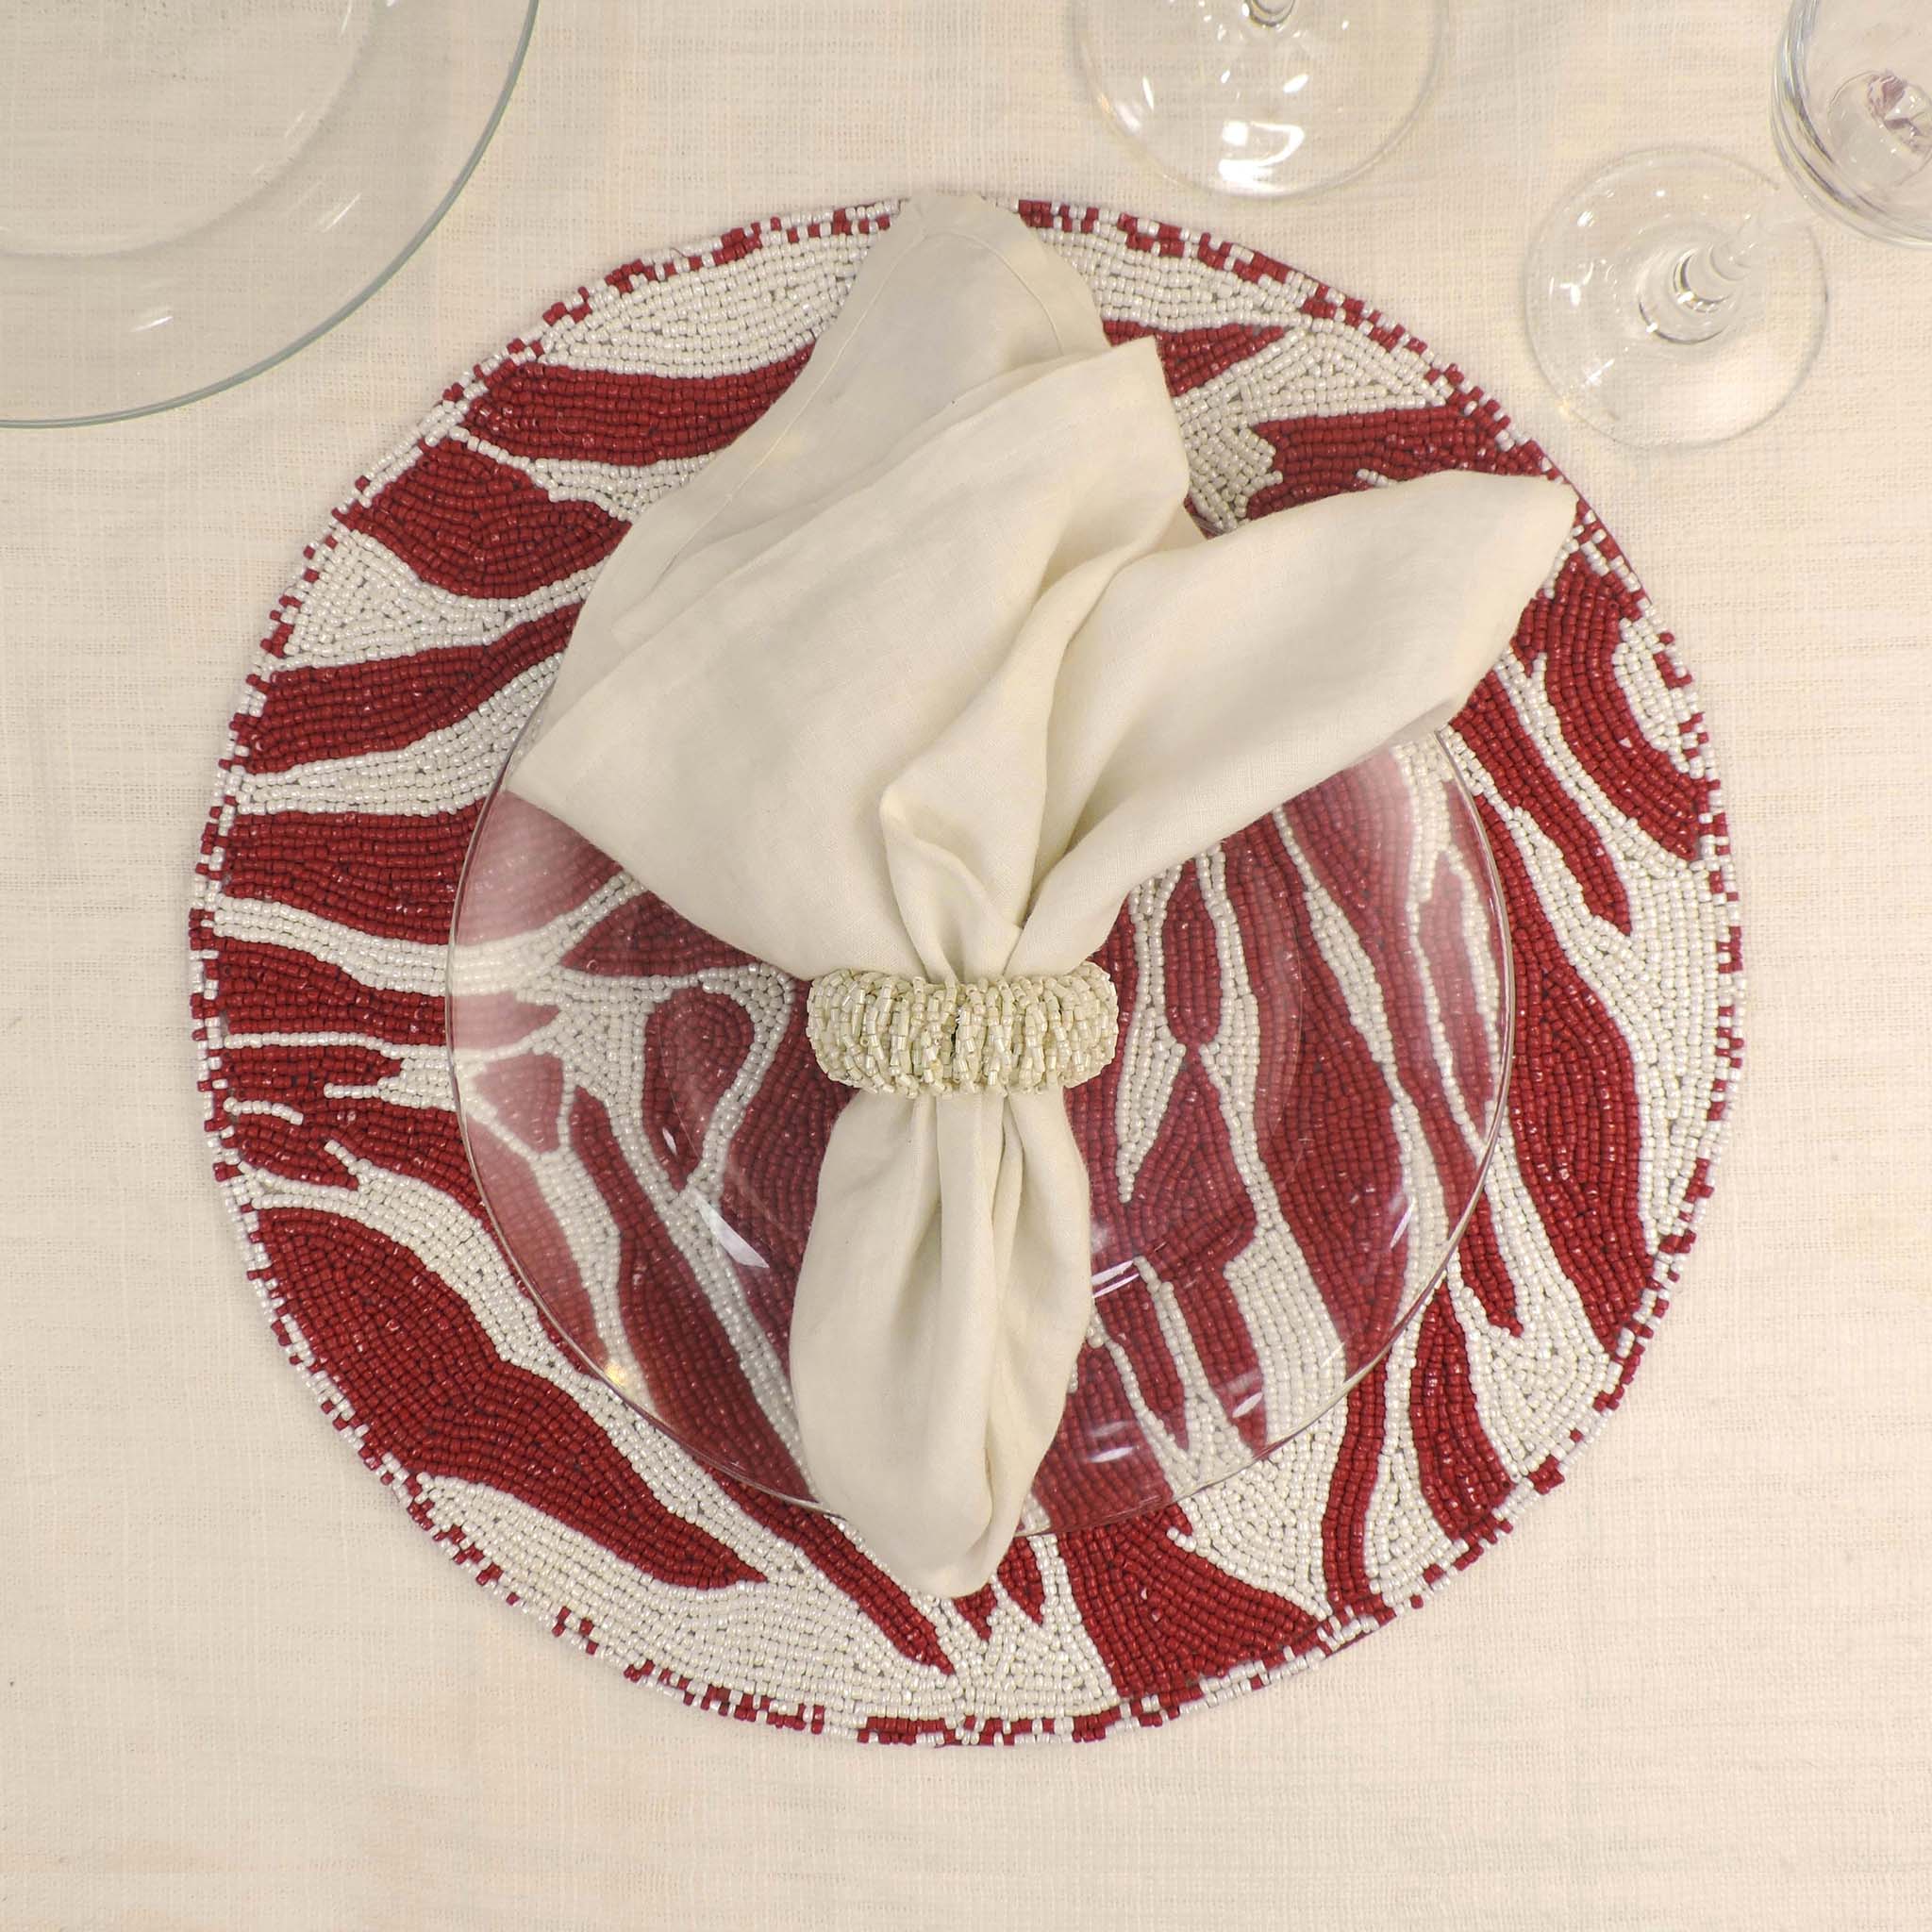 Modern Camo Glass Bead Embroidered Placemat in Red & White, Set of 2/4